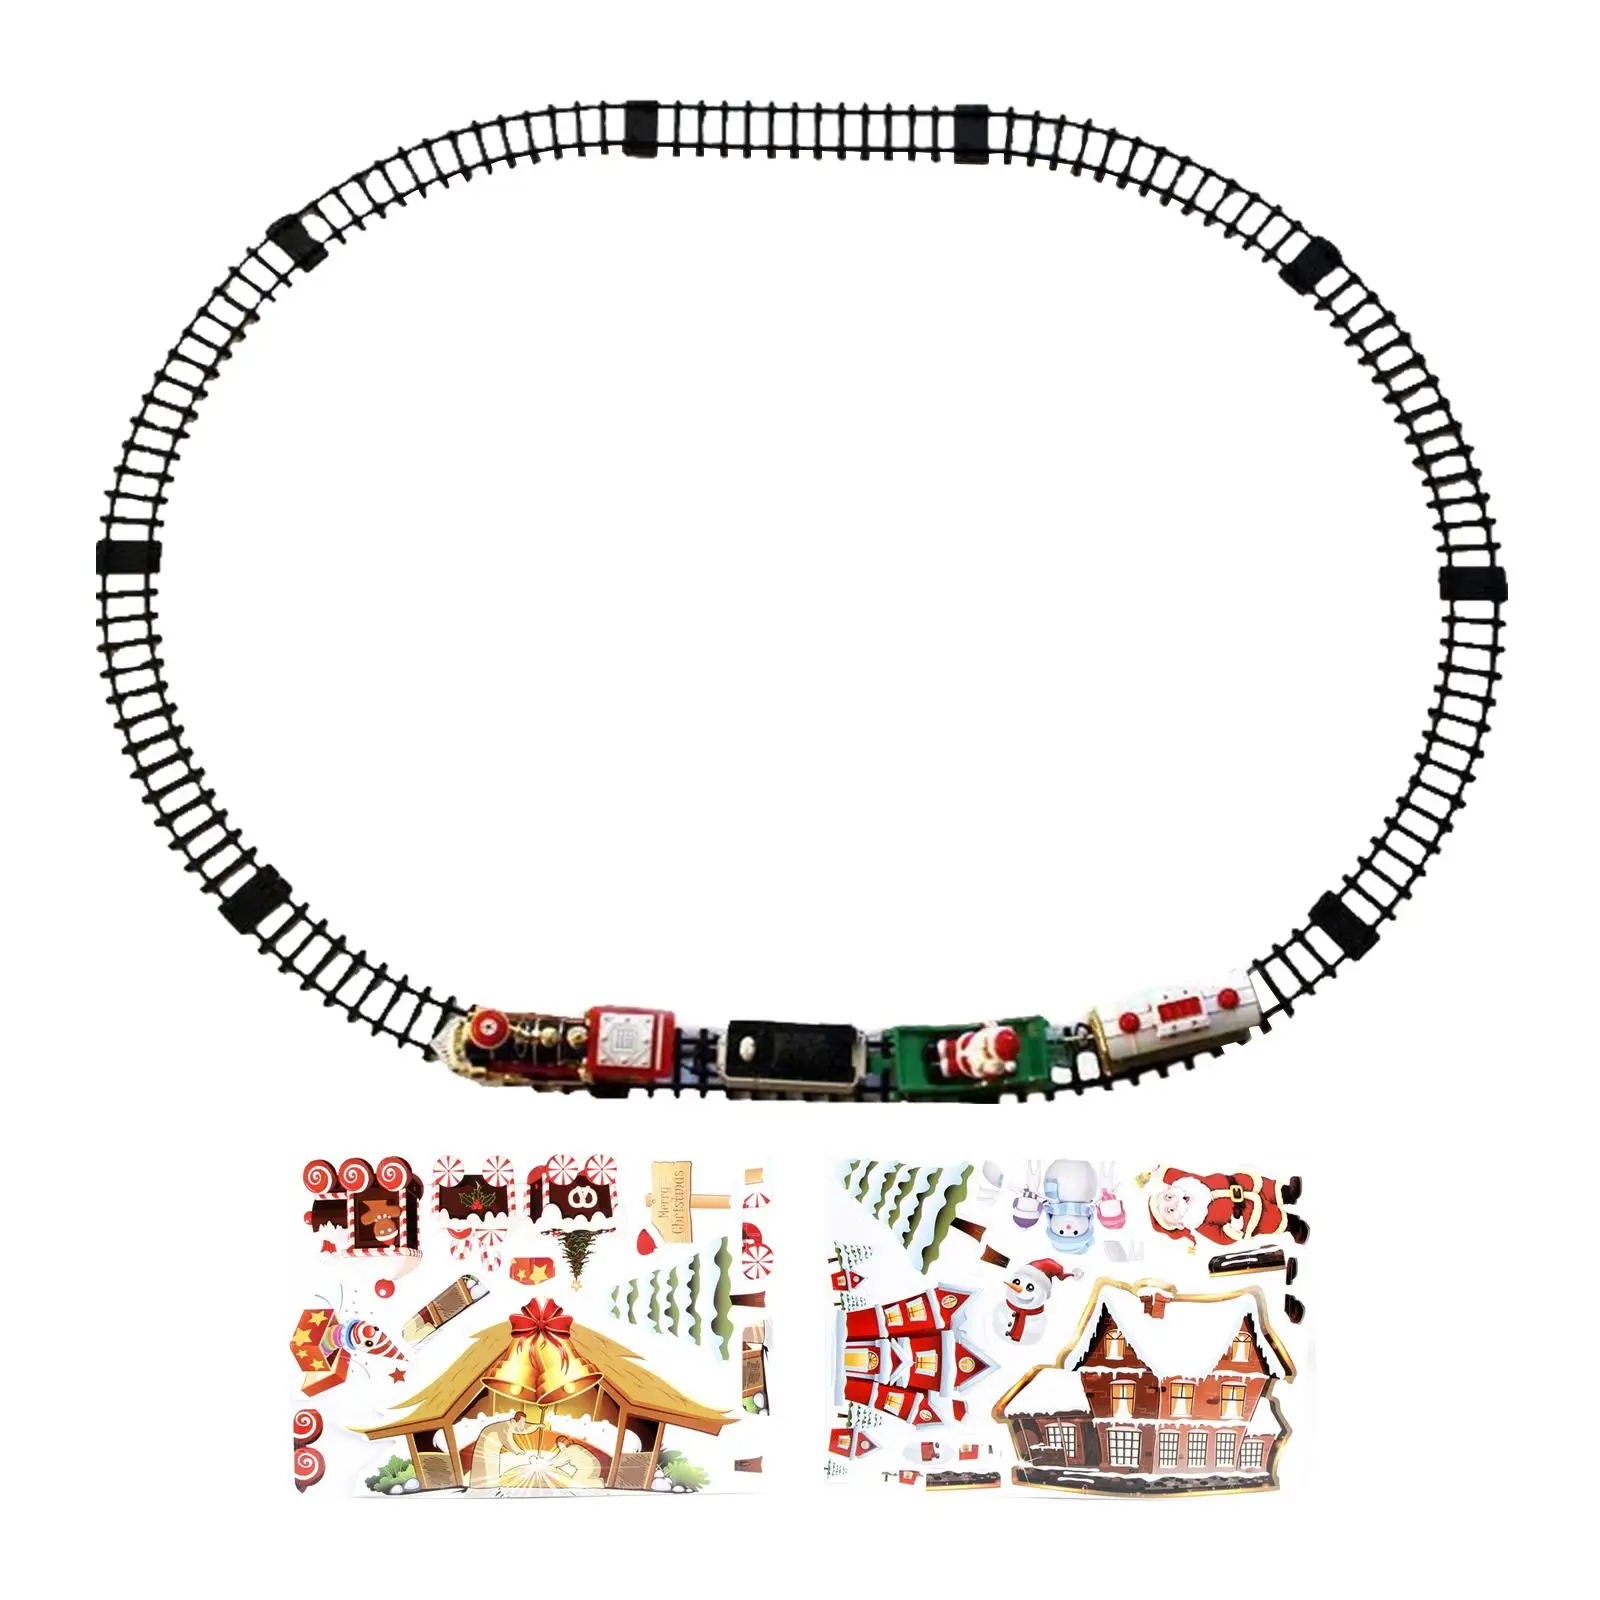 Electric Train Set Xmas Tree Decors with Lights and Sounds Kid Toy Railway Track Set for New Year Preschool Toddlers Gifts